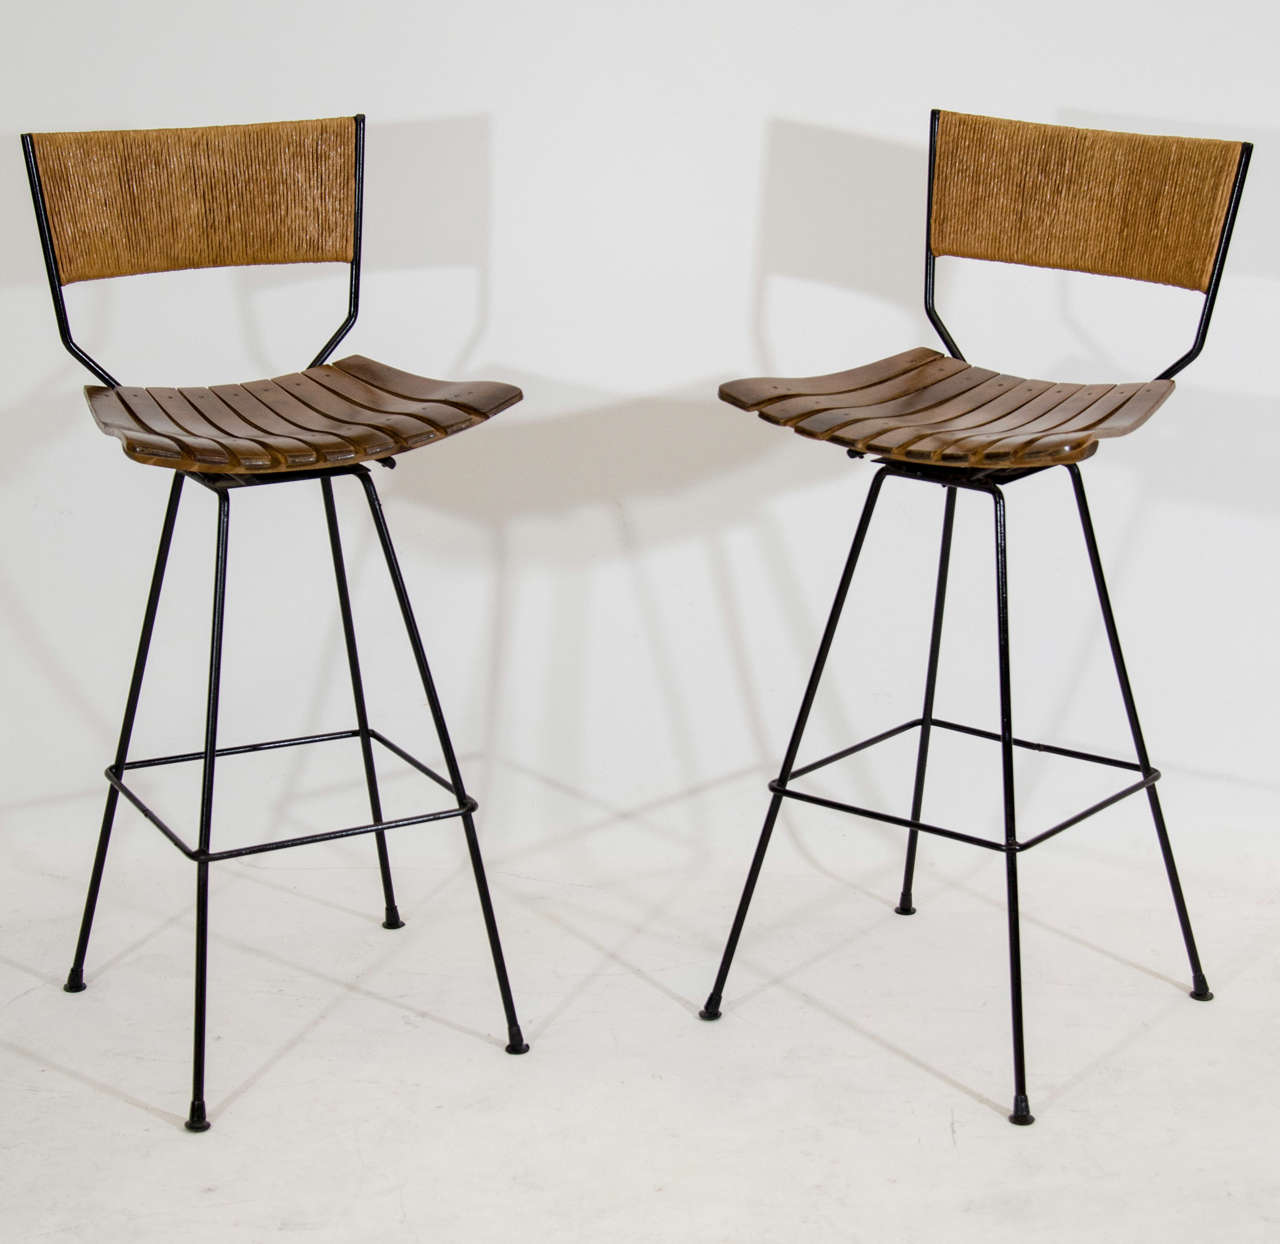 Classic pair of bar stools designed by Arthur Umanoff. The stools swivel and have walnut slatted seats and backrests covered in grass. Please contact for location.